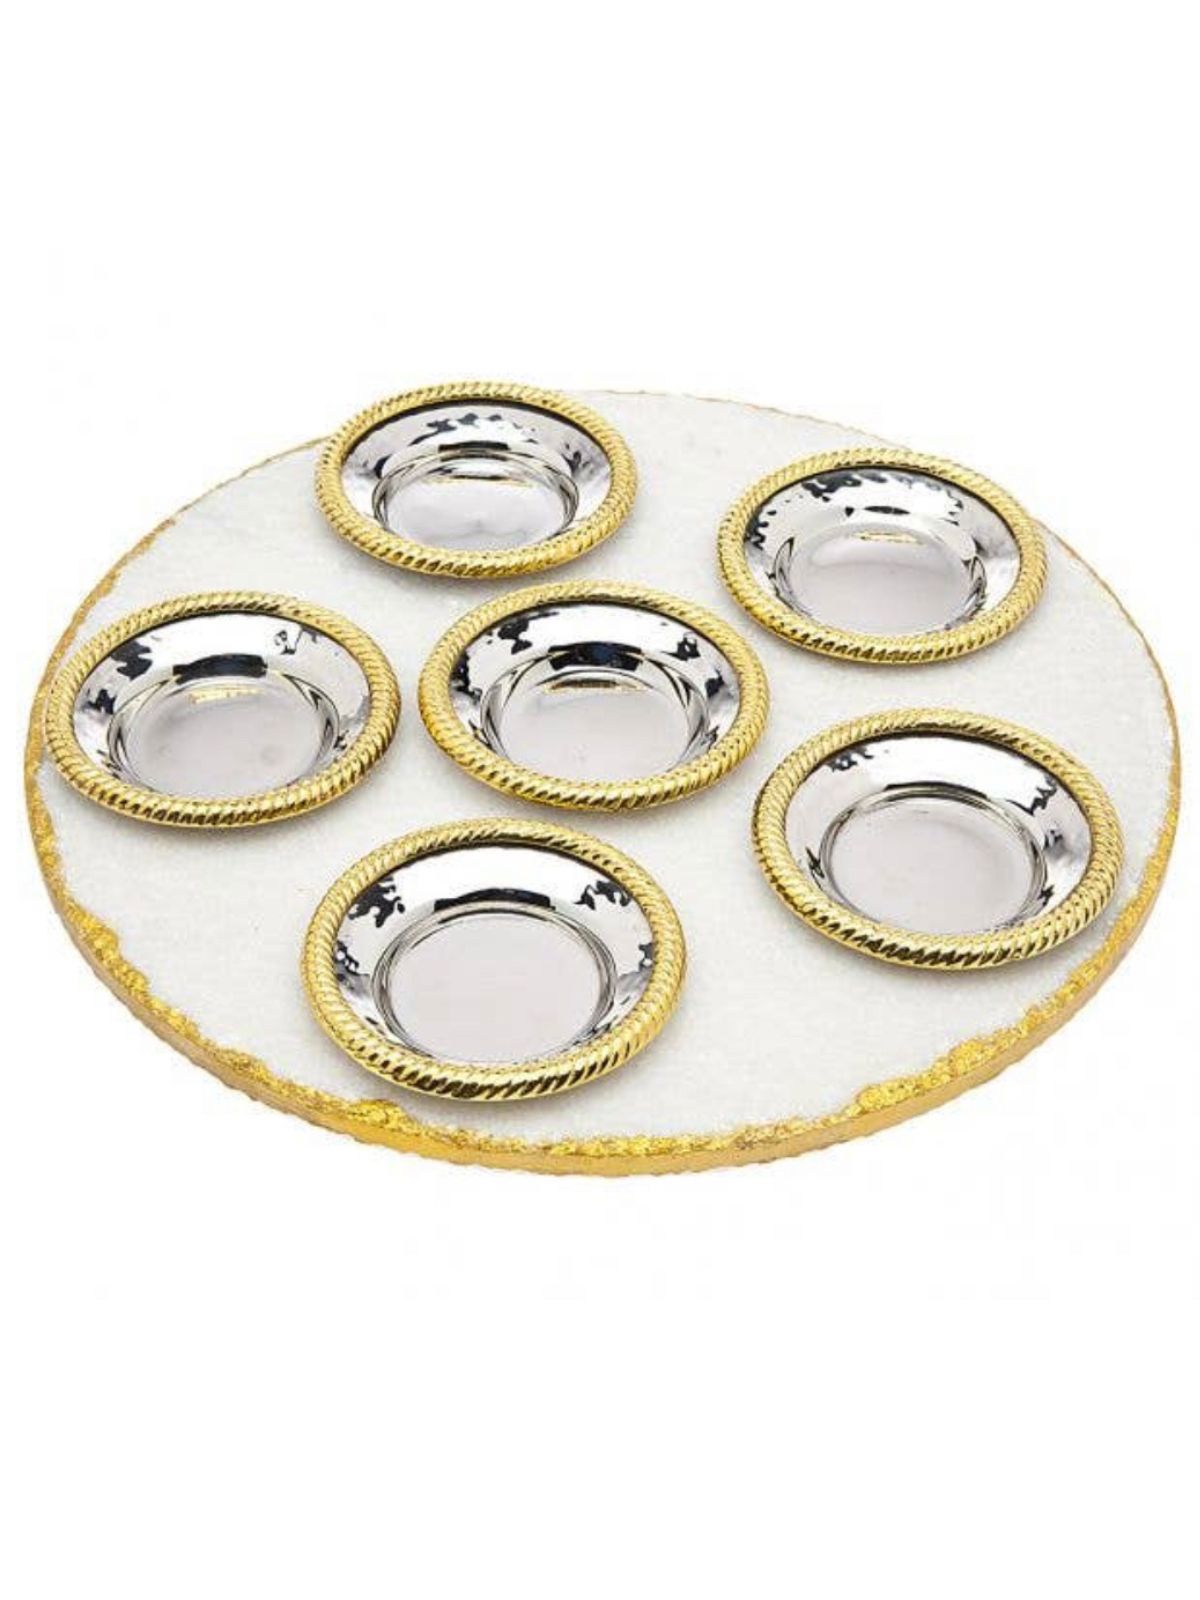 Seder Plate Crafted from white marble and six luxurious gold trim stainless steel dishes. 